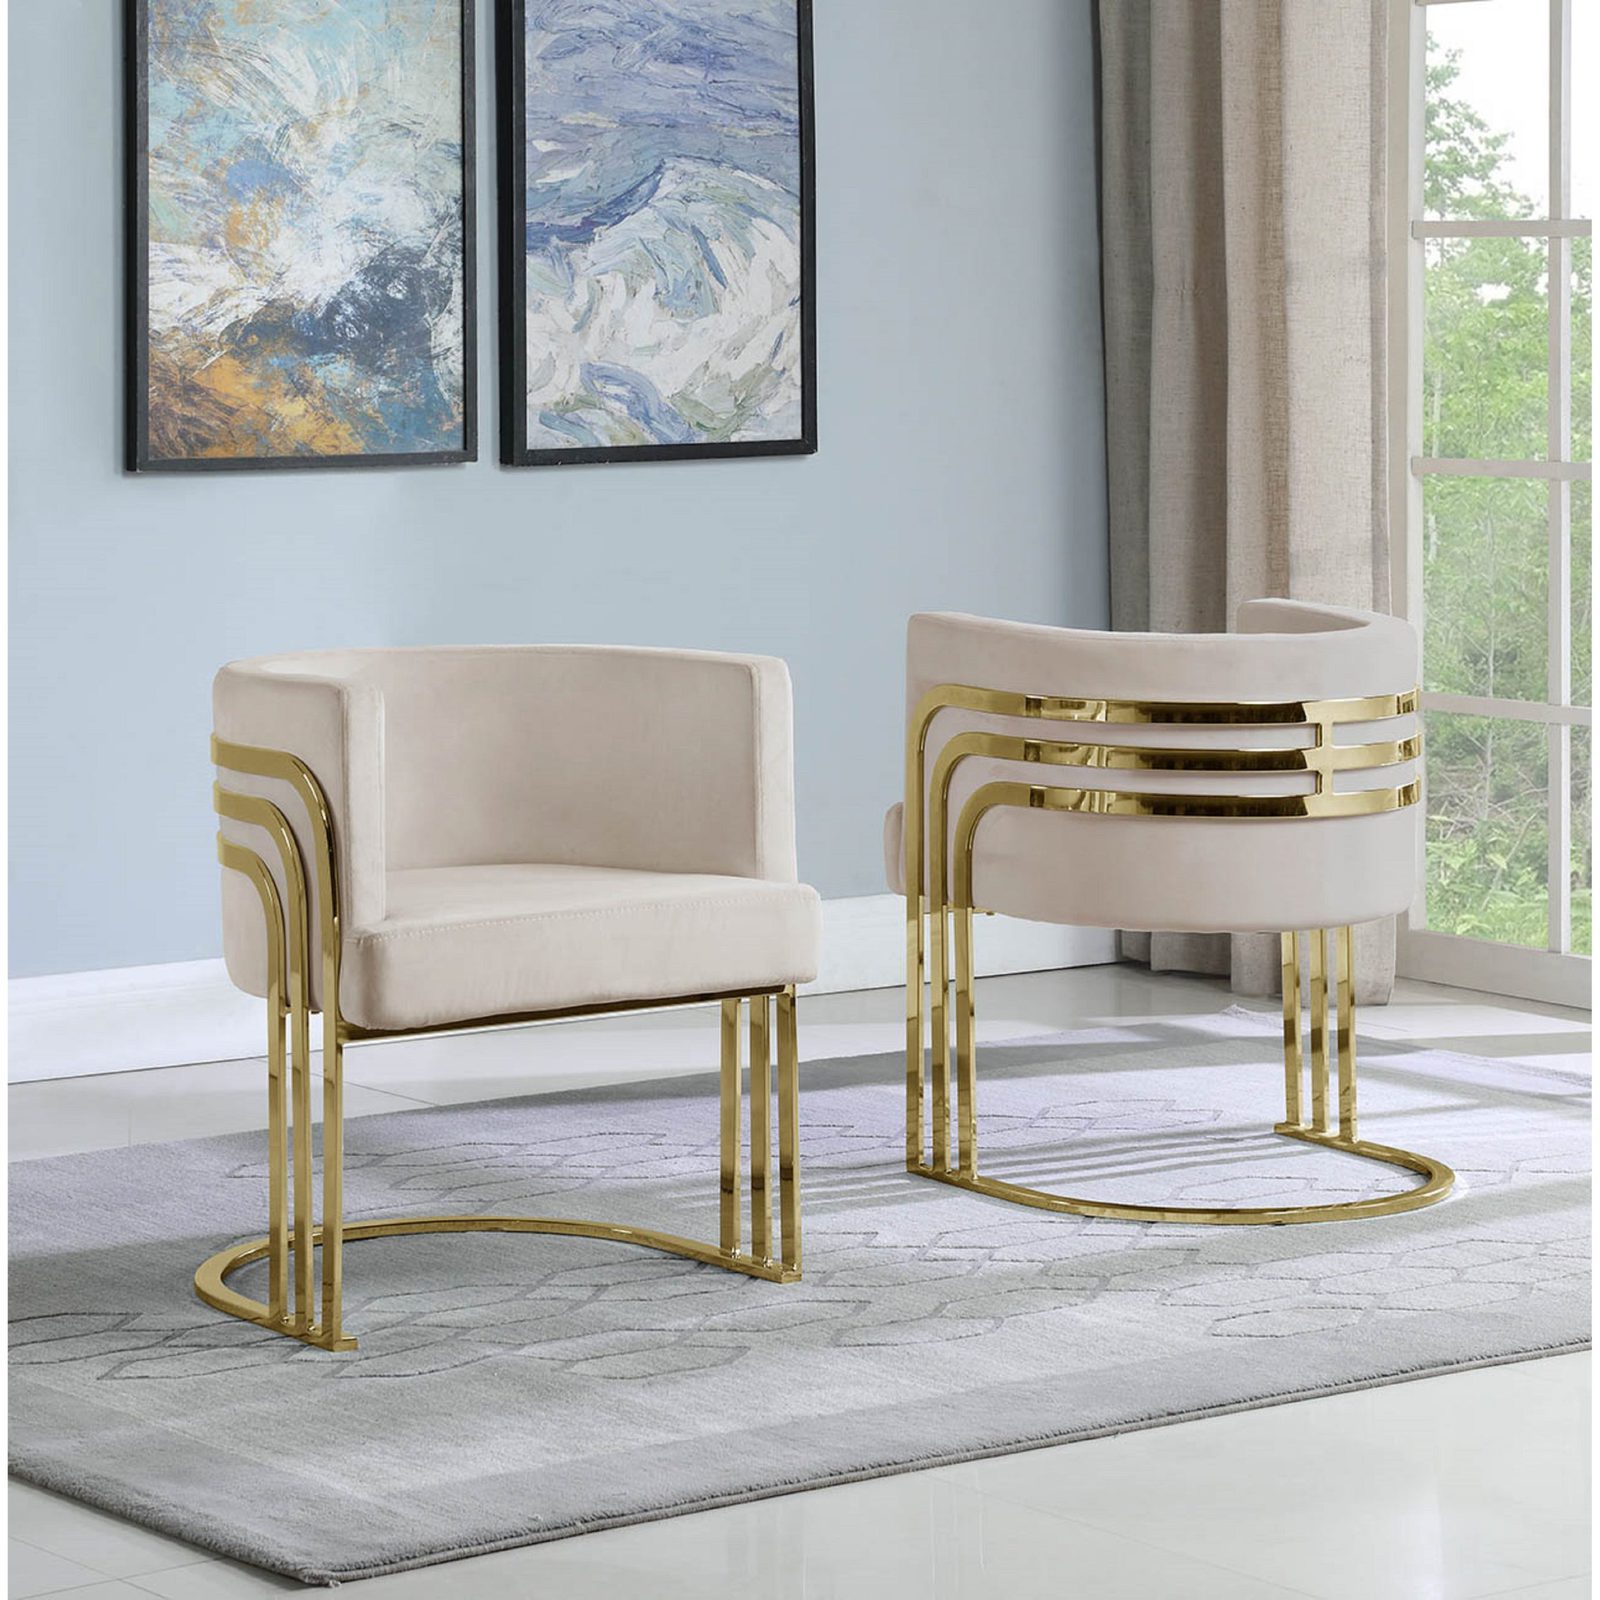 White Accent Chair With a Gold Base